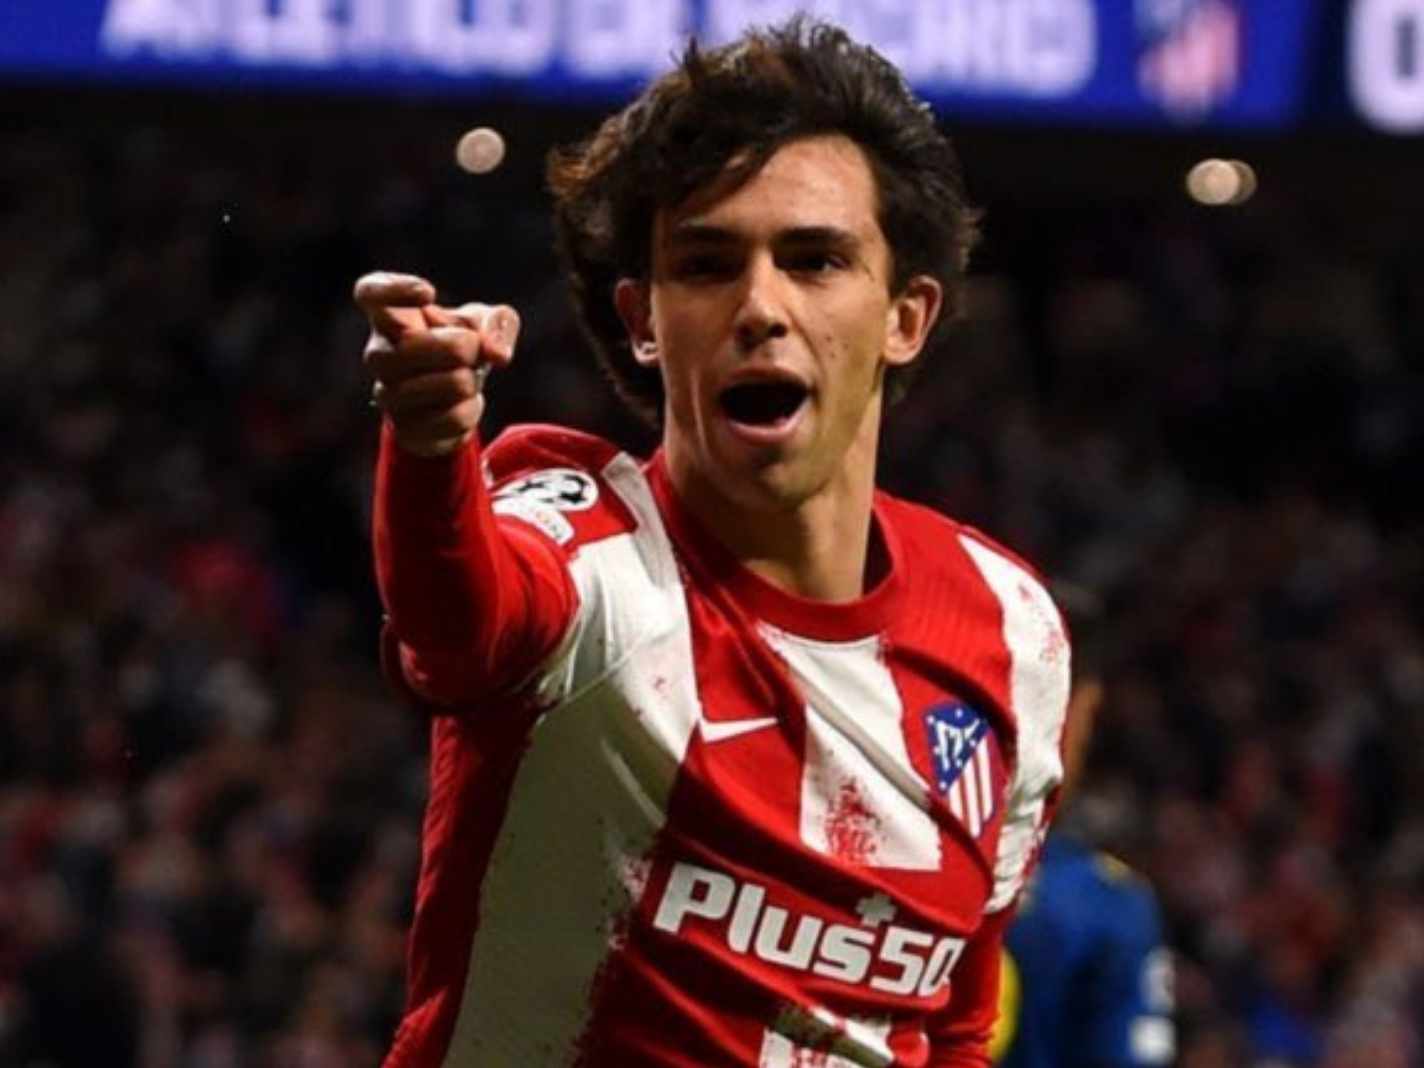 The big problem with Joao Felix celebrating his goal against Man United with gun gesture